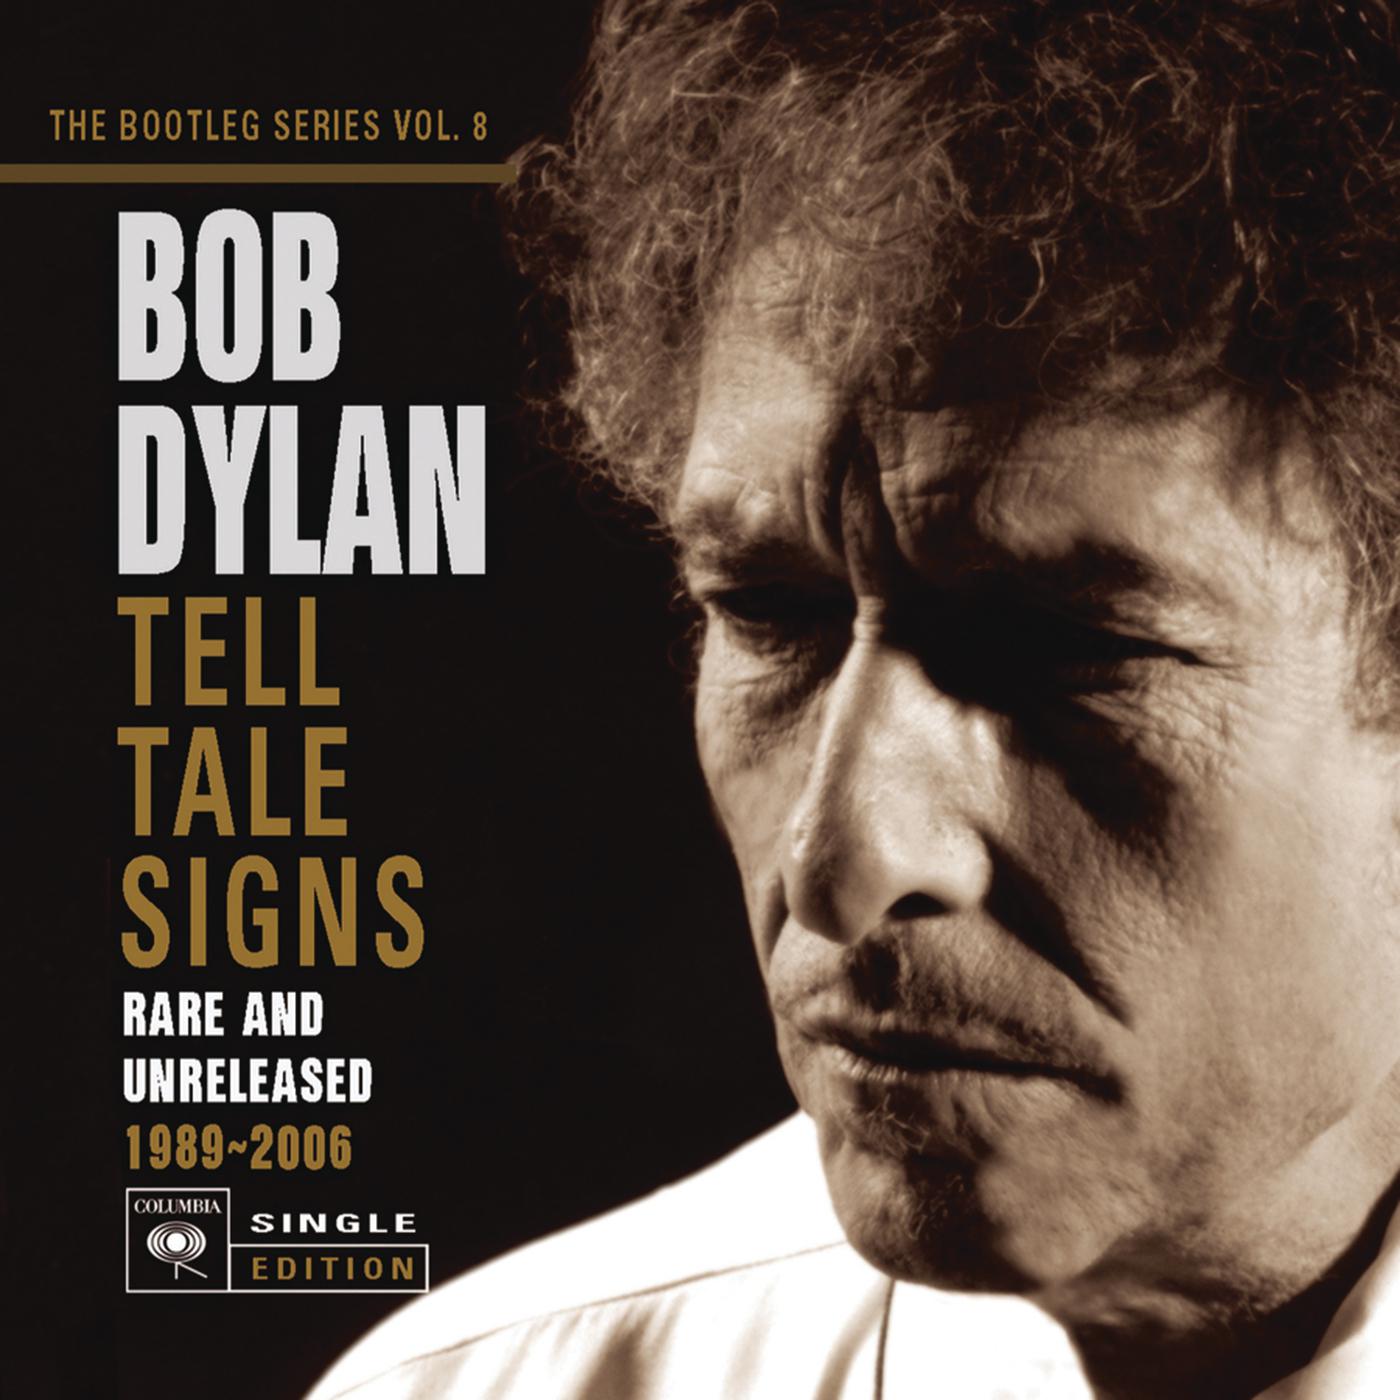 Bob Dylan - High Water (For Charley Patton) (Live at Oakes Garden Theatre, Niagara Falls, ON - August 2003)